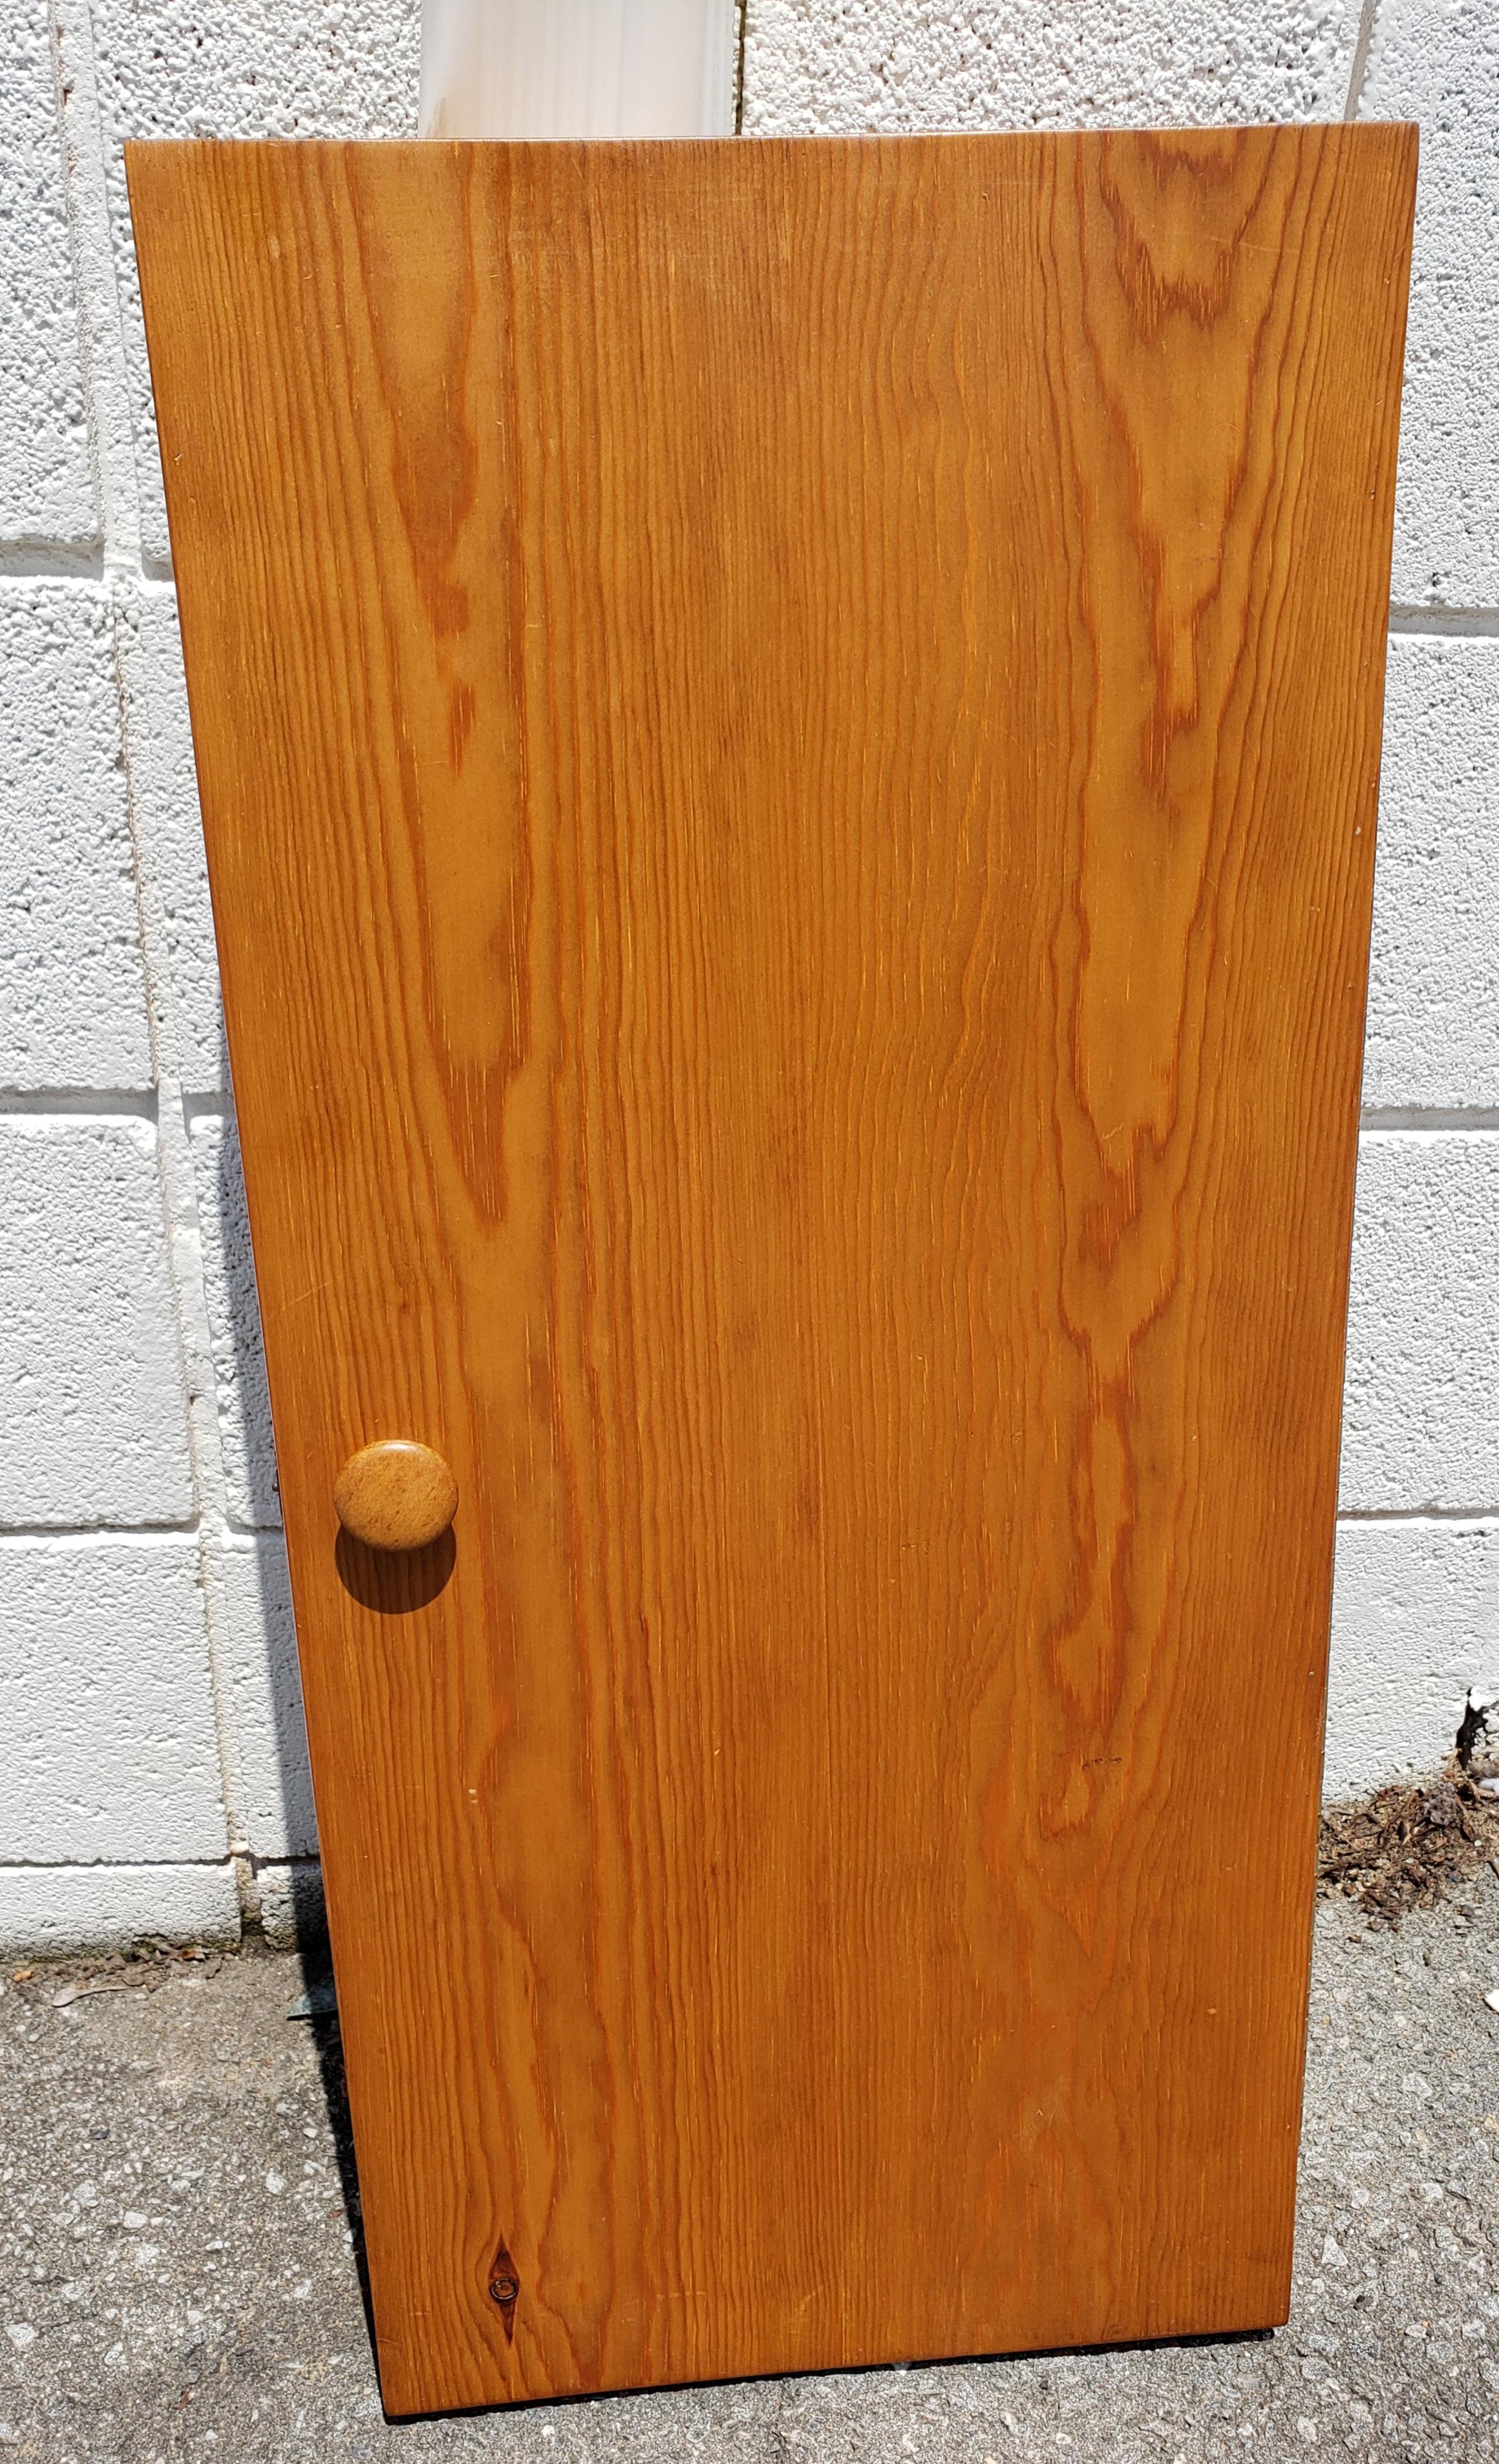 A Late 20th Century Amish Hand-Crafted Pine Wall Cabinet in great vintage condition. Measures 13.75